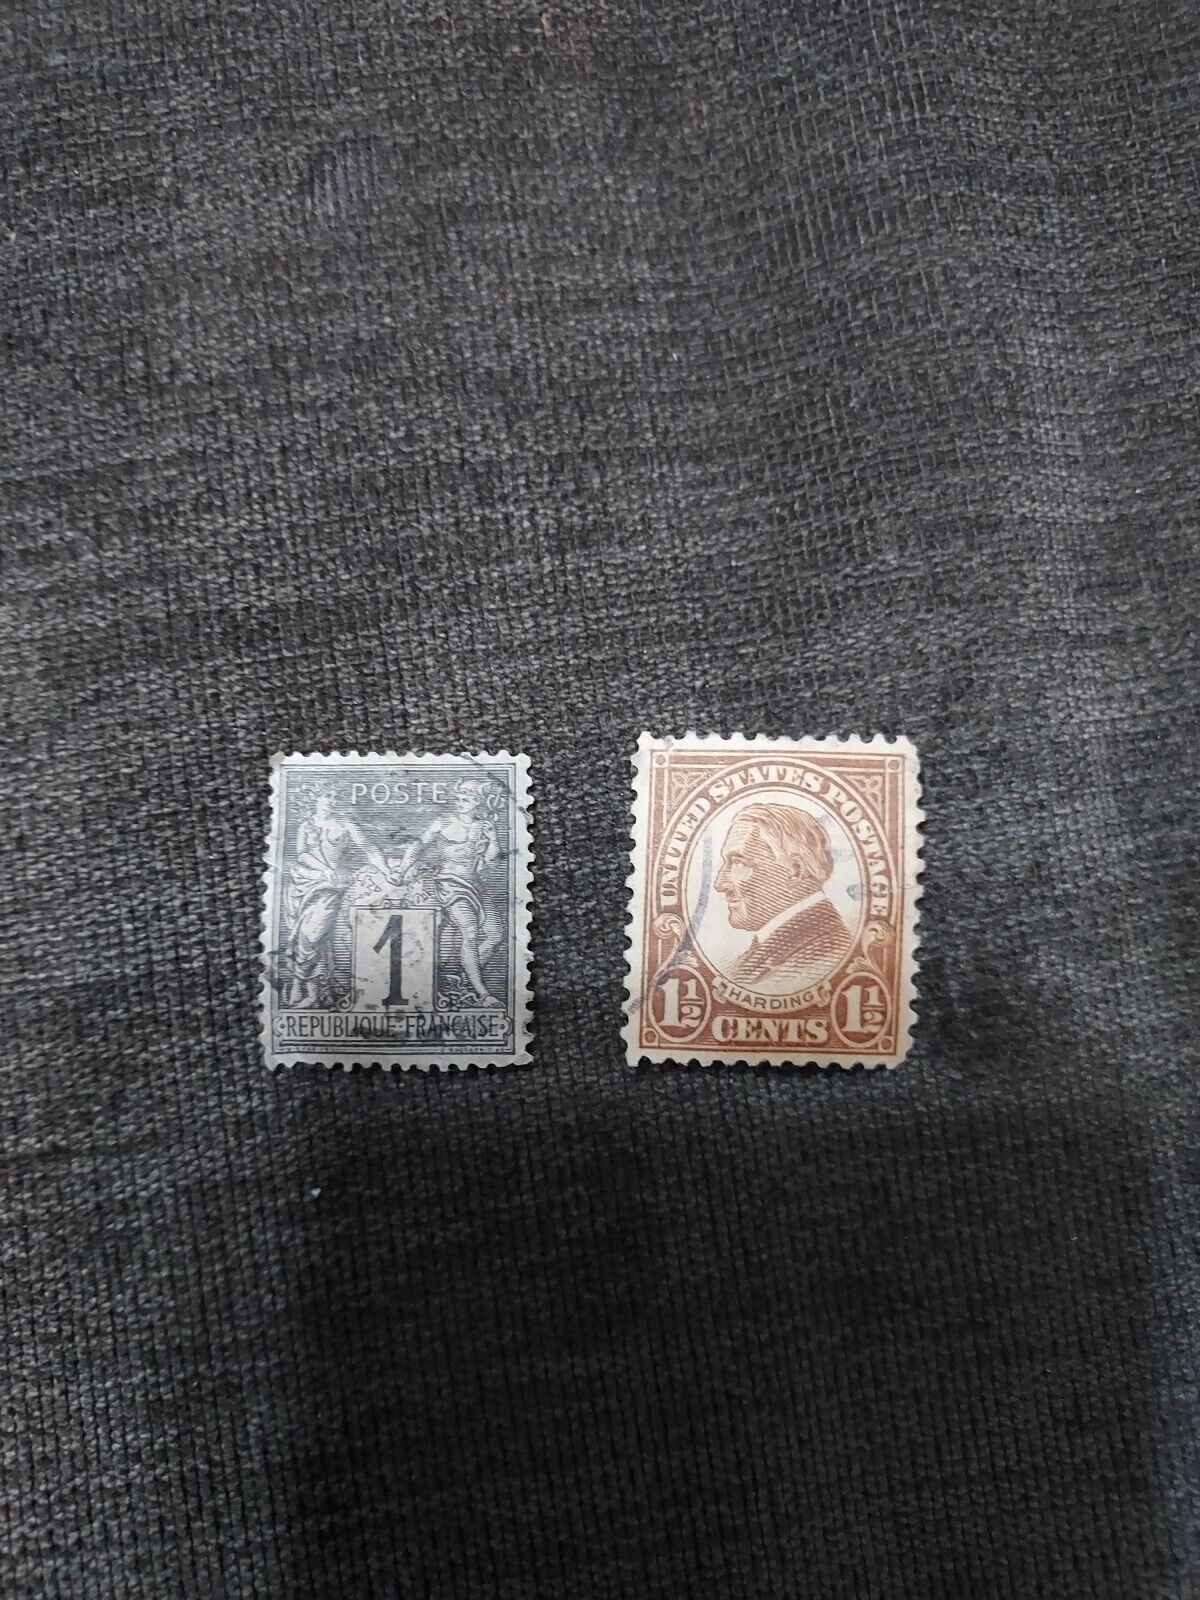 1 Cent Republique Francaise Stamp And 1 1/2 Cent Harding Stamp